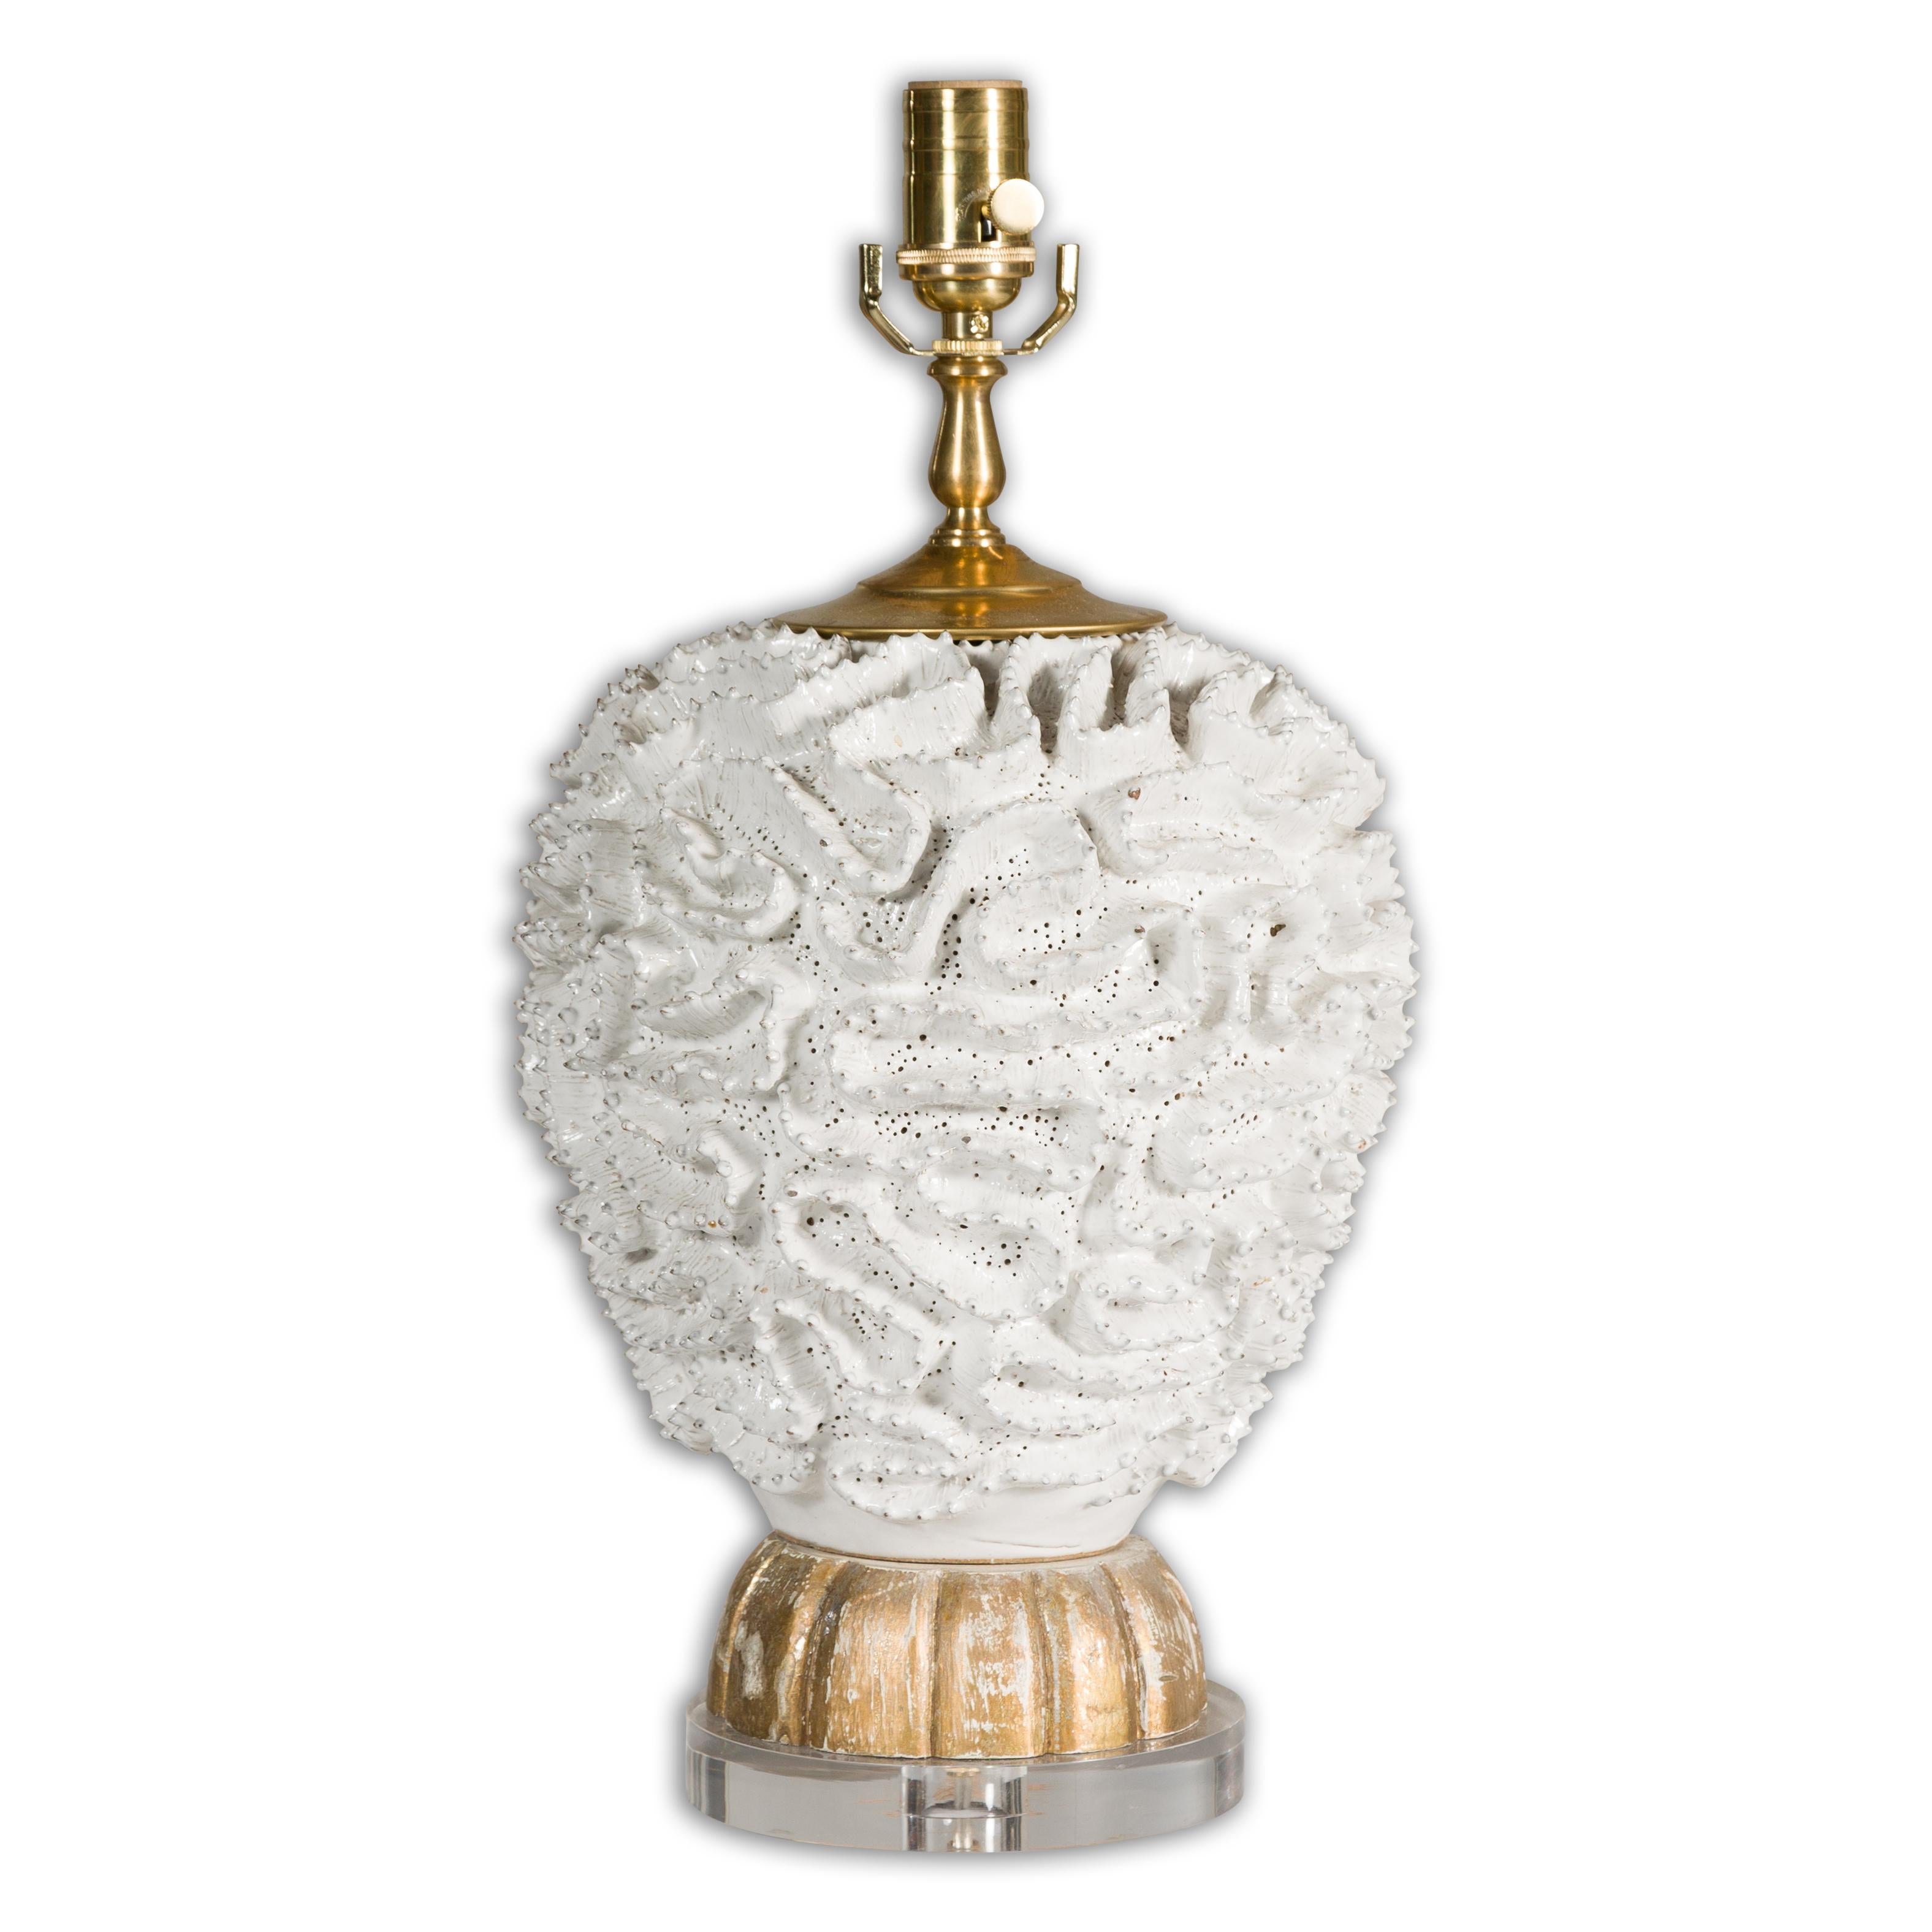 A Midcentury Italian white pottery table lamp with textured body and carved gilt wood base on round lucite. Emanating an aura of refined sophistication, this Italian Midcentury white pottery table lamp makes a powerful aesthetic statement.